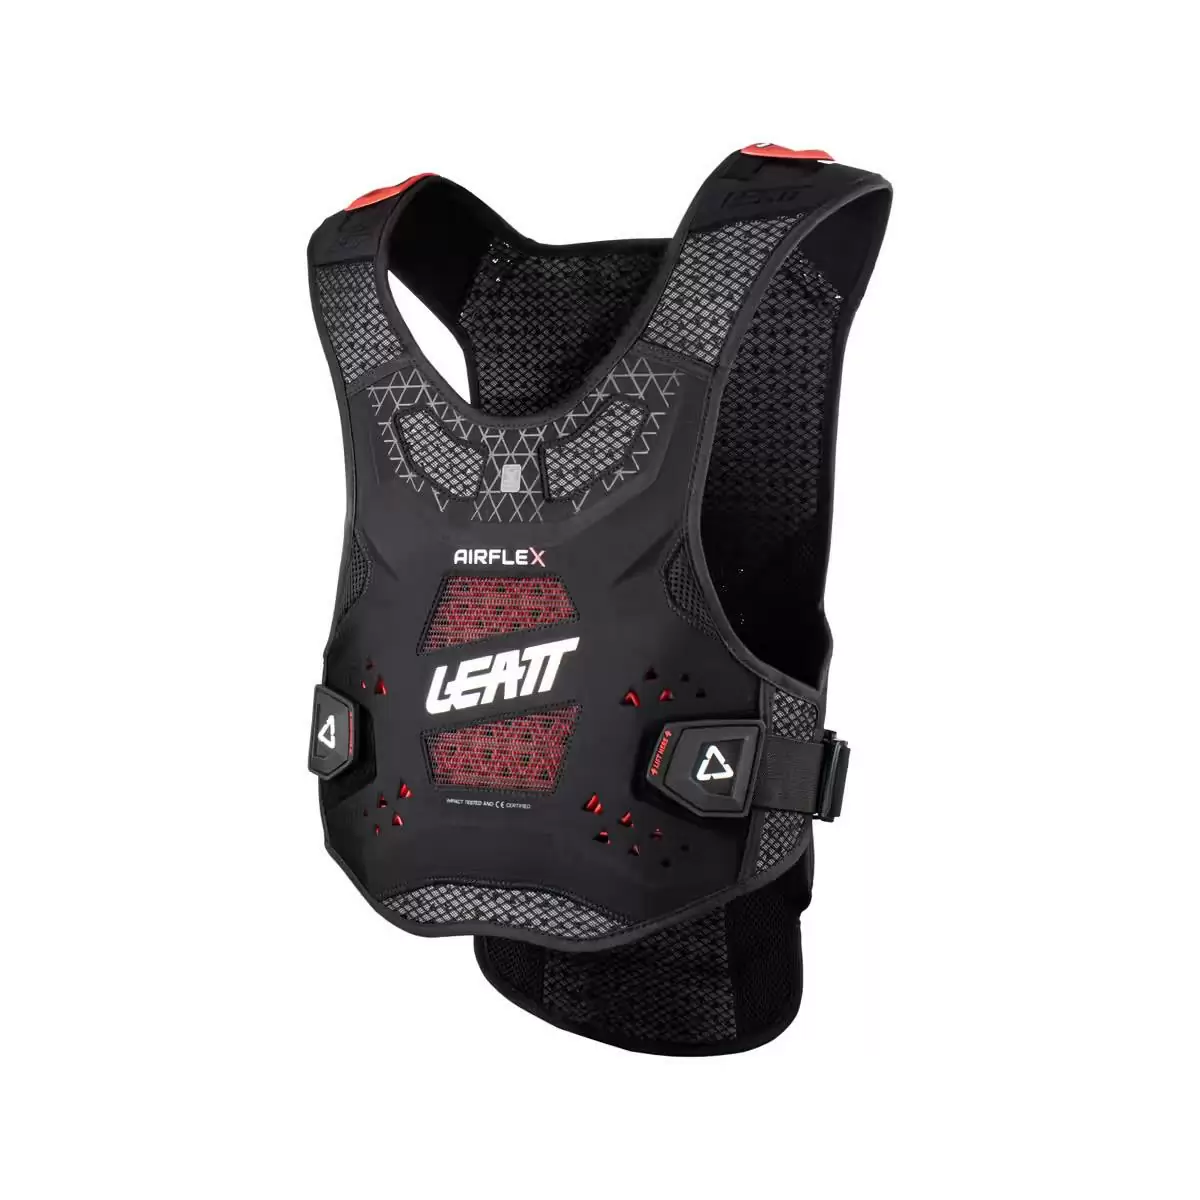 Chest Protector Airflex size XXL - image